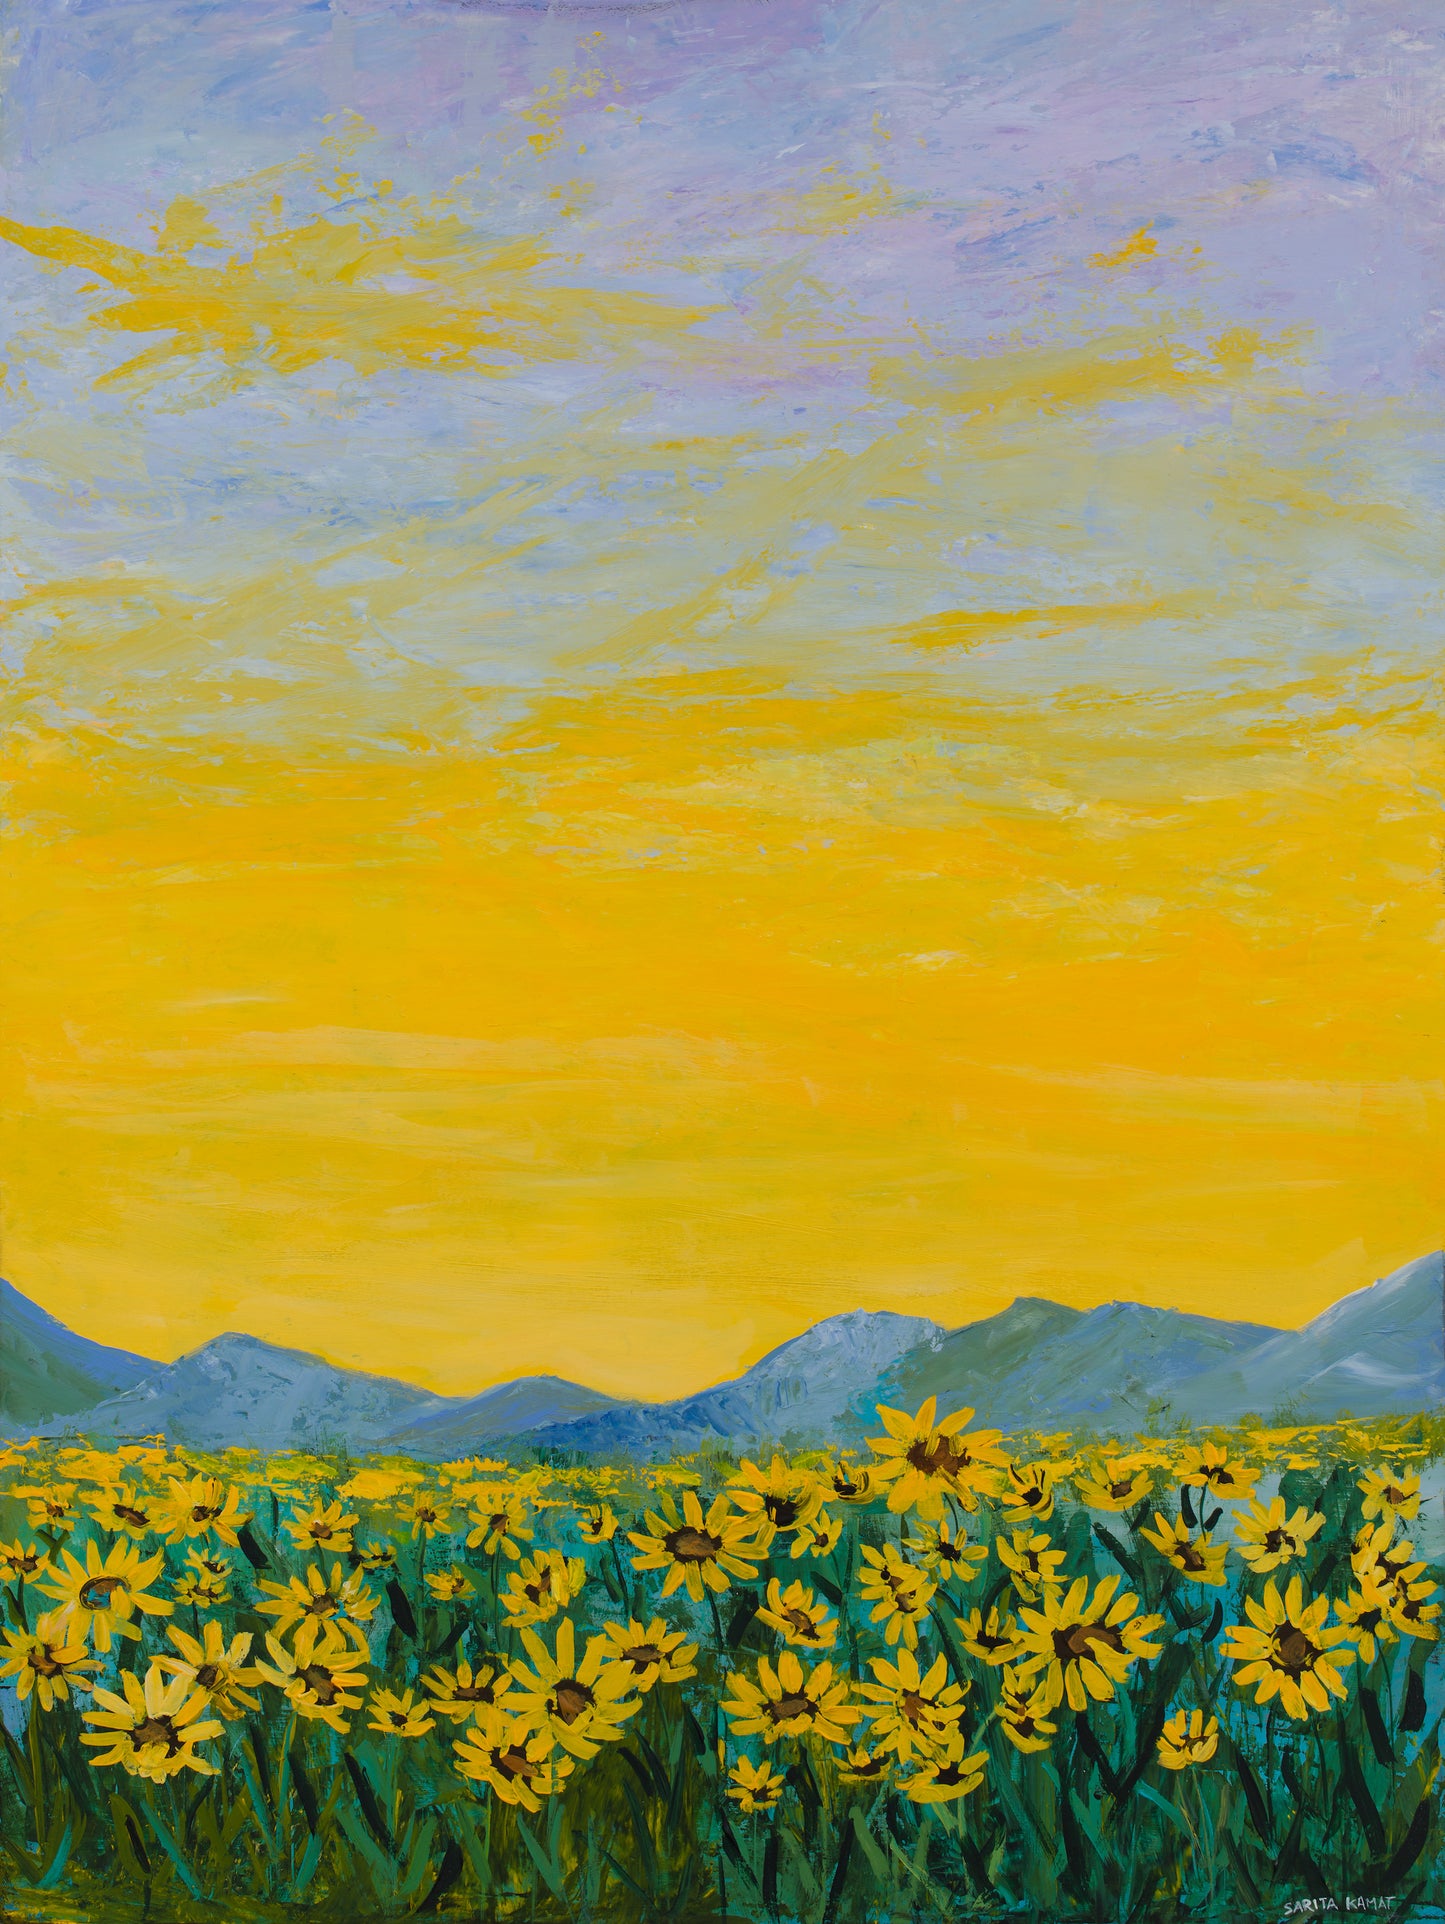 Where the Sunflowers Meet the Mountains - Acrylic Painting